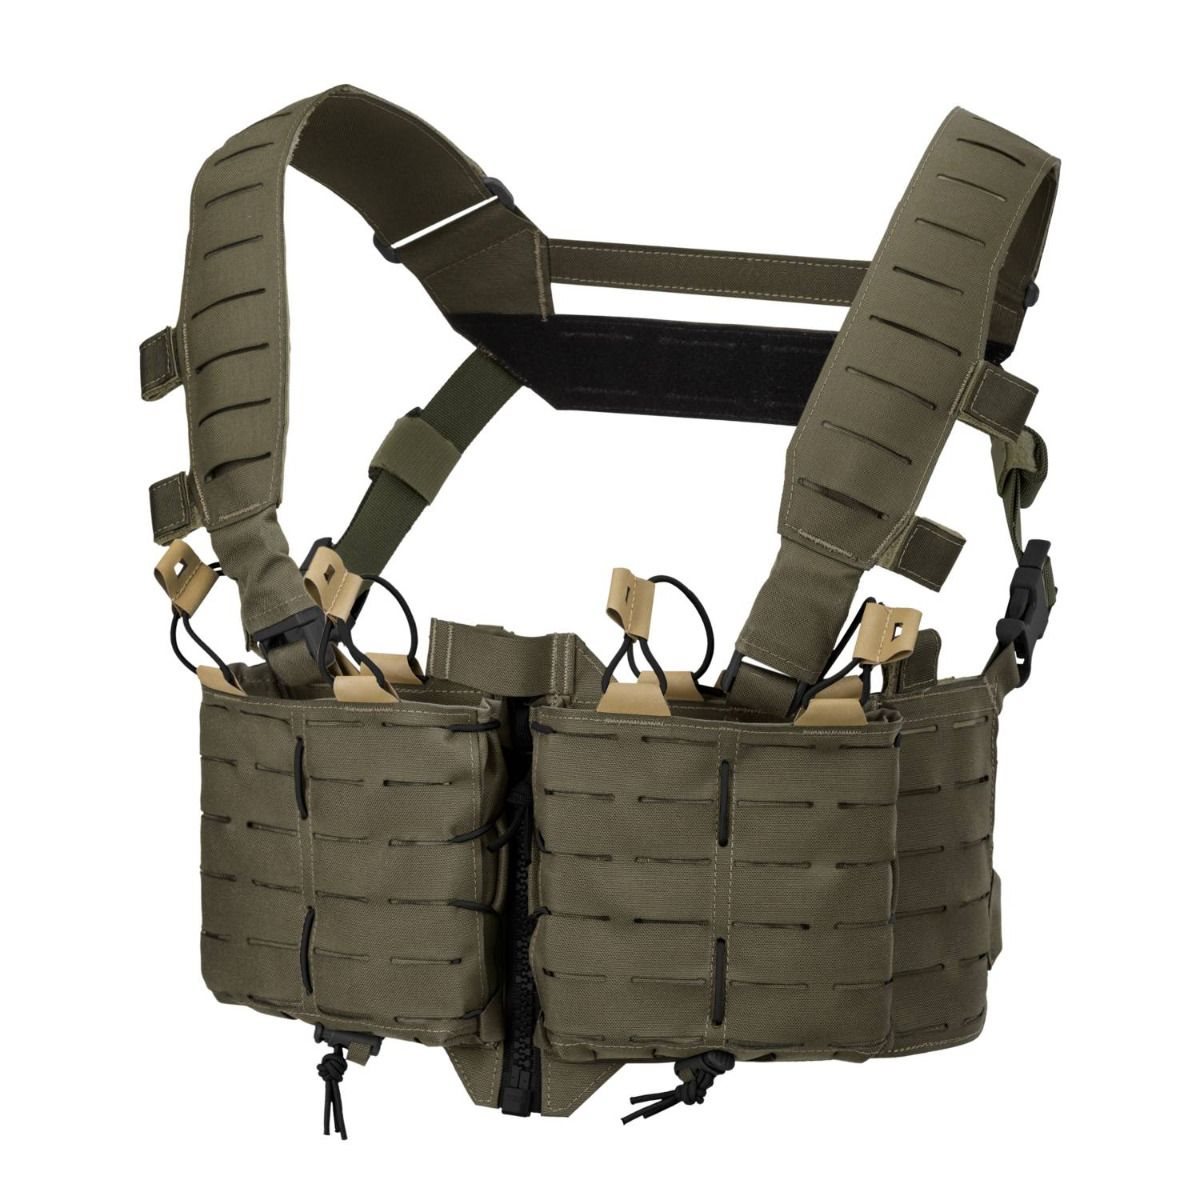 DIRECT ACTION TEMPEST CHEST RIG RANGER GREEN | Army surplus MILITARY RANGE